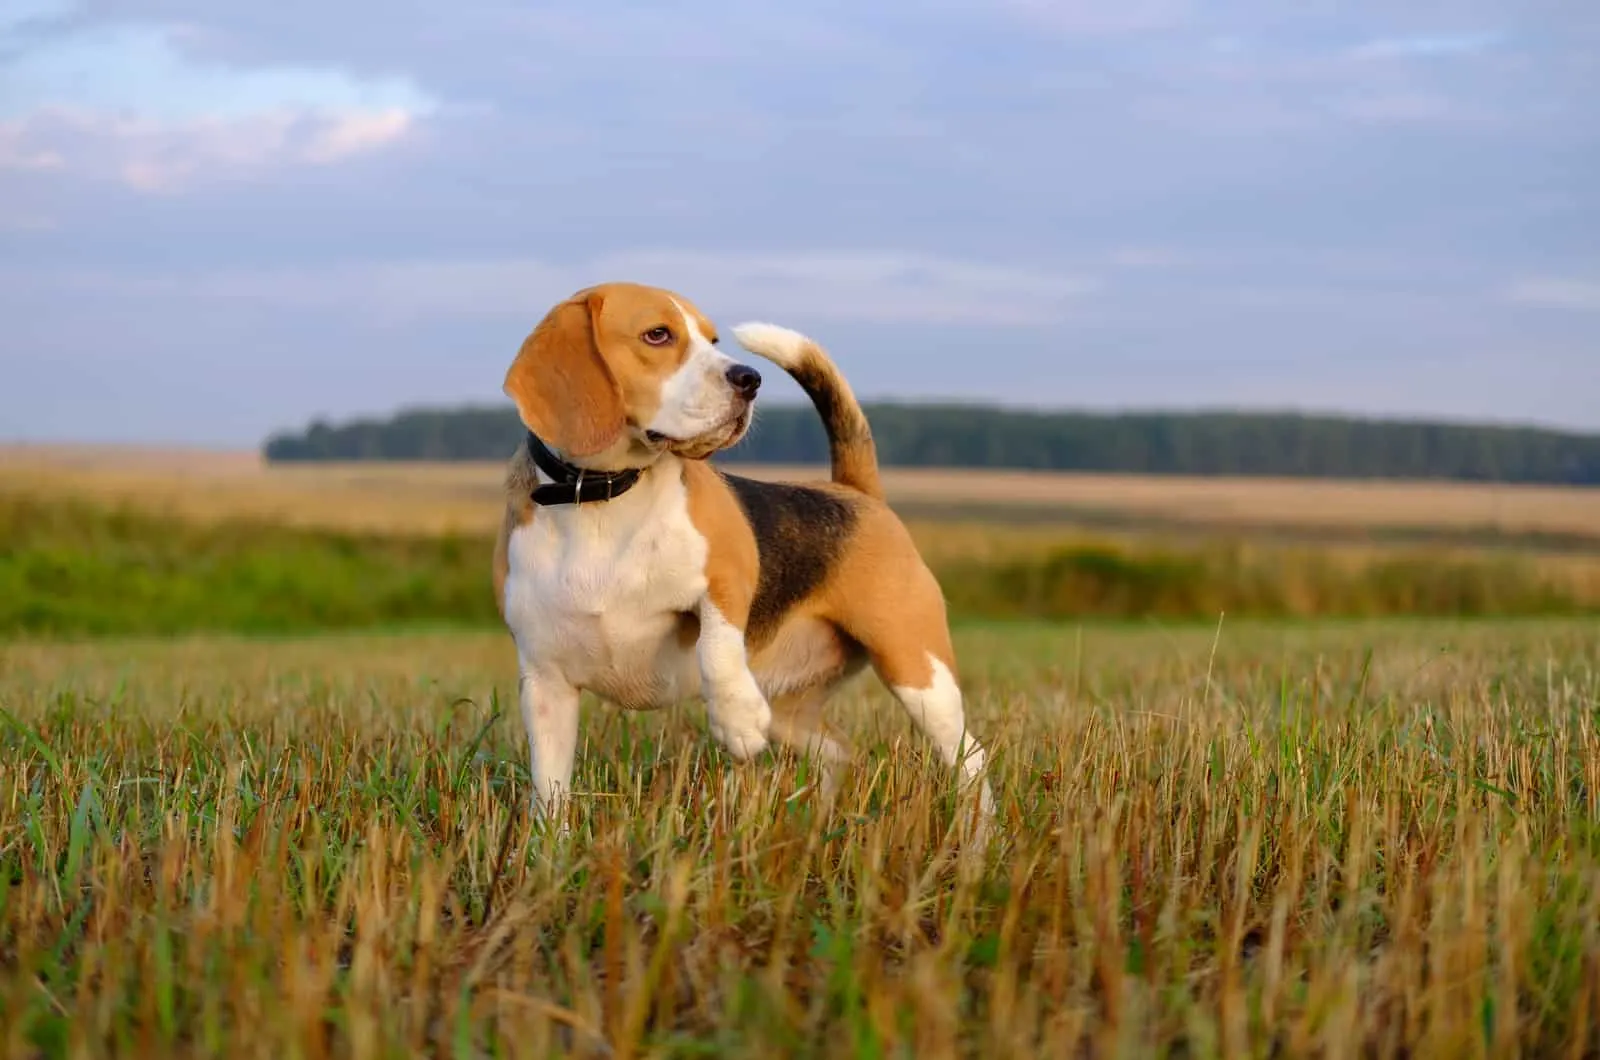 dog Beagle on a walk early in the morning at sunrise